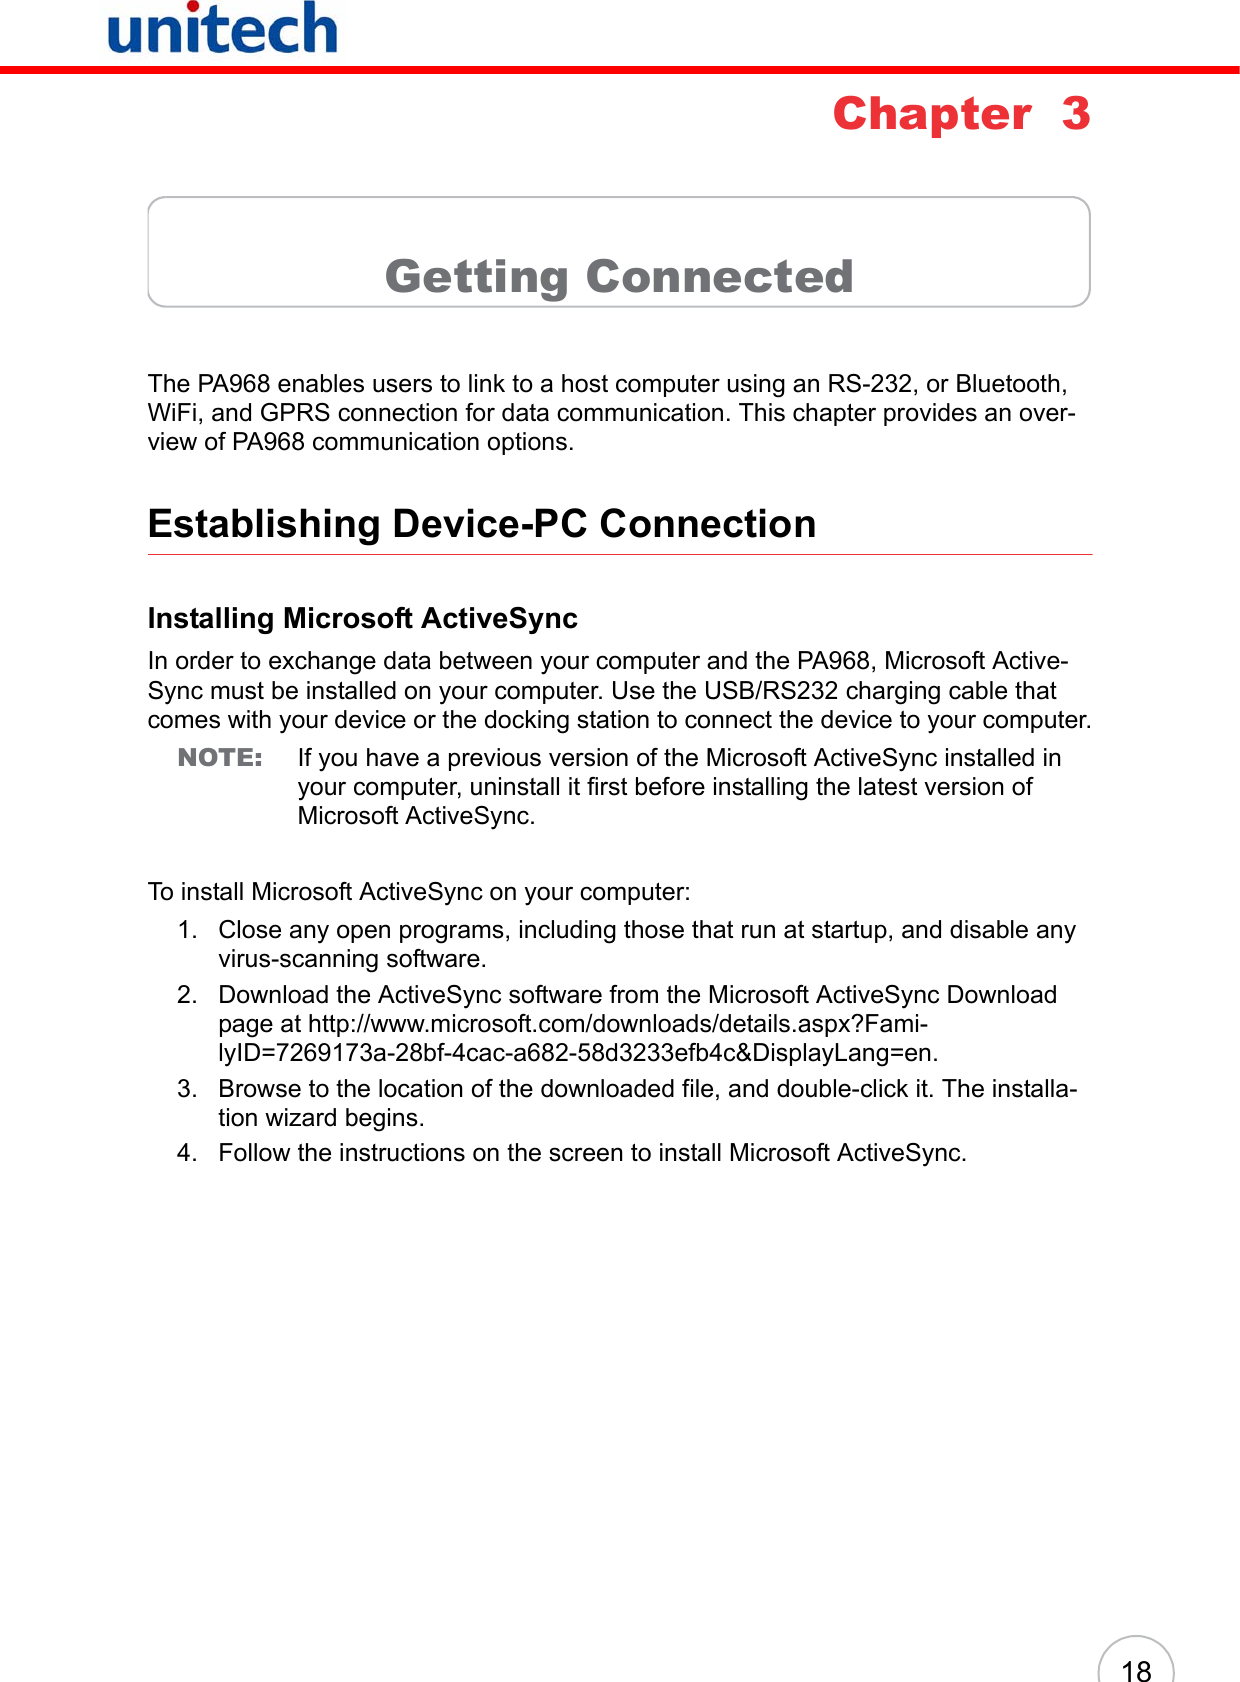 18Chapter  3Getting ConnectedThe PA968 enables users to link to a host computer using an RS-232, or Bluetooth, WiFi, and GPRS connection for data communication. This chapter provides an over-view of PA968 communication options.Establishing Device-PC ConnectionInstalling Microsoft ActiveSyncIn order to exchange data between your computer and the PA968, Microsoft Active-Sync must be installed on your computer. Use the USB/RS232 charging cable that comes with your device or the docking station to connect the device to your computer.NOTE: If you have a previous version of the Microsoft ActiveSync installed in your computer, uninstall it first before installing the latest version of Microsoft ActiveSync.To install Microsoft ActiveSync on your computer:1. Close any open programs, including those that run at startup, and disable any virus-scanning software.2. Download the ActiveSync software from the Microsoft ActiveSync Download page at http://www.microsoft.com/downloads/details.aspx?Fami-lyID=7269173a-28bf-4cac-a682-58d3233efb4c&amp;DisplayLang=en.3. Browse to the location of the downloaded file, and double-click it. The installa-tion wizard begins.4. Follow the instructions on the screen to install Microsoft ActiveSync.